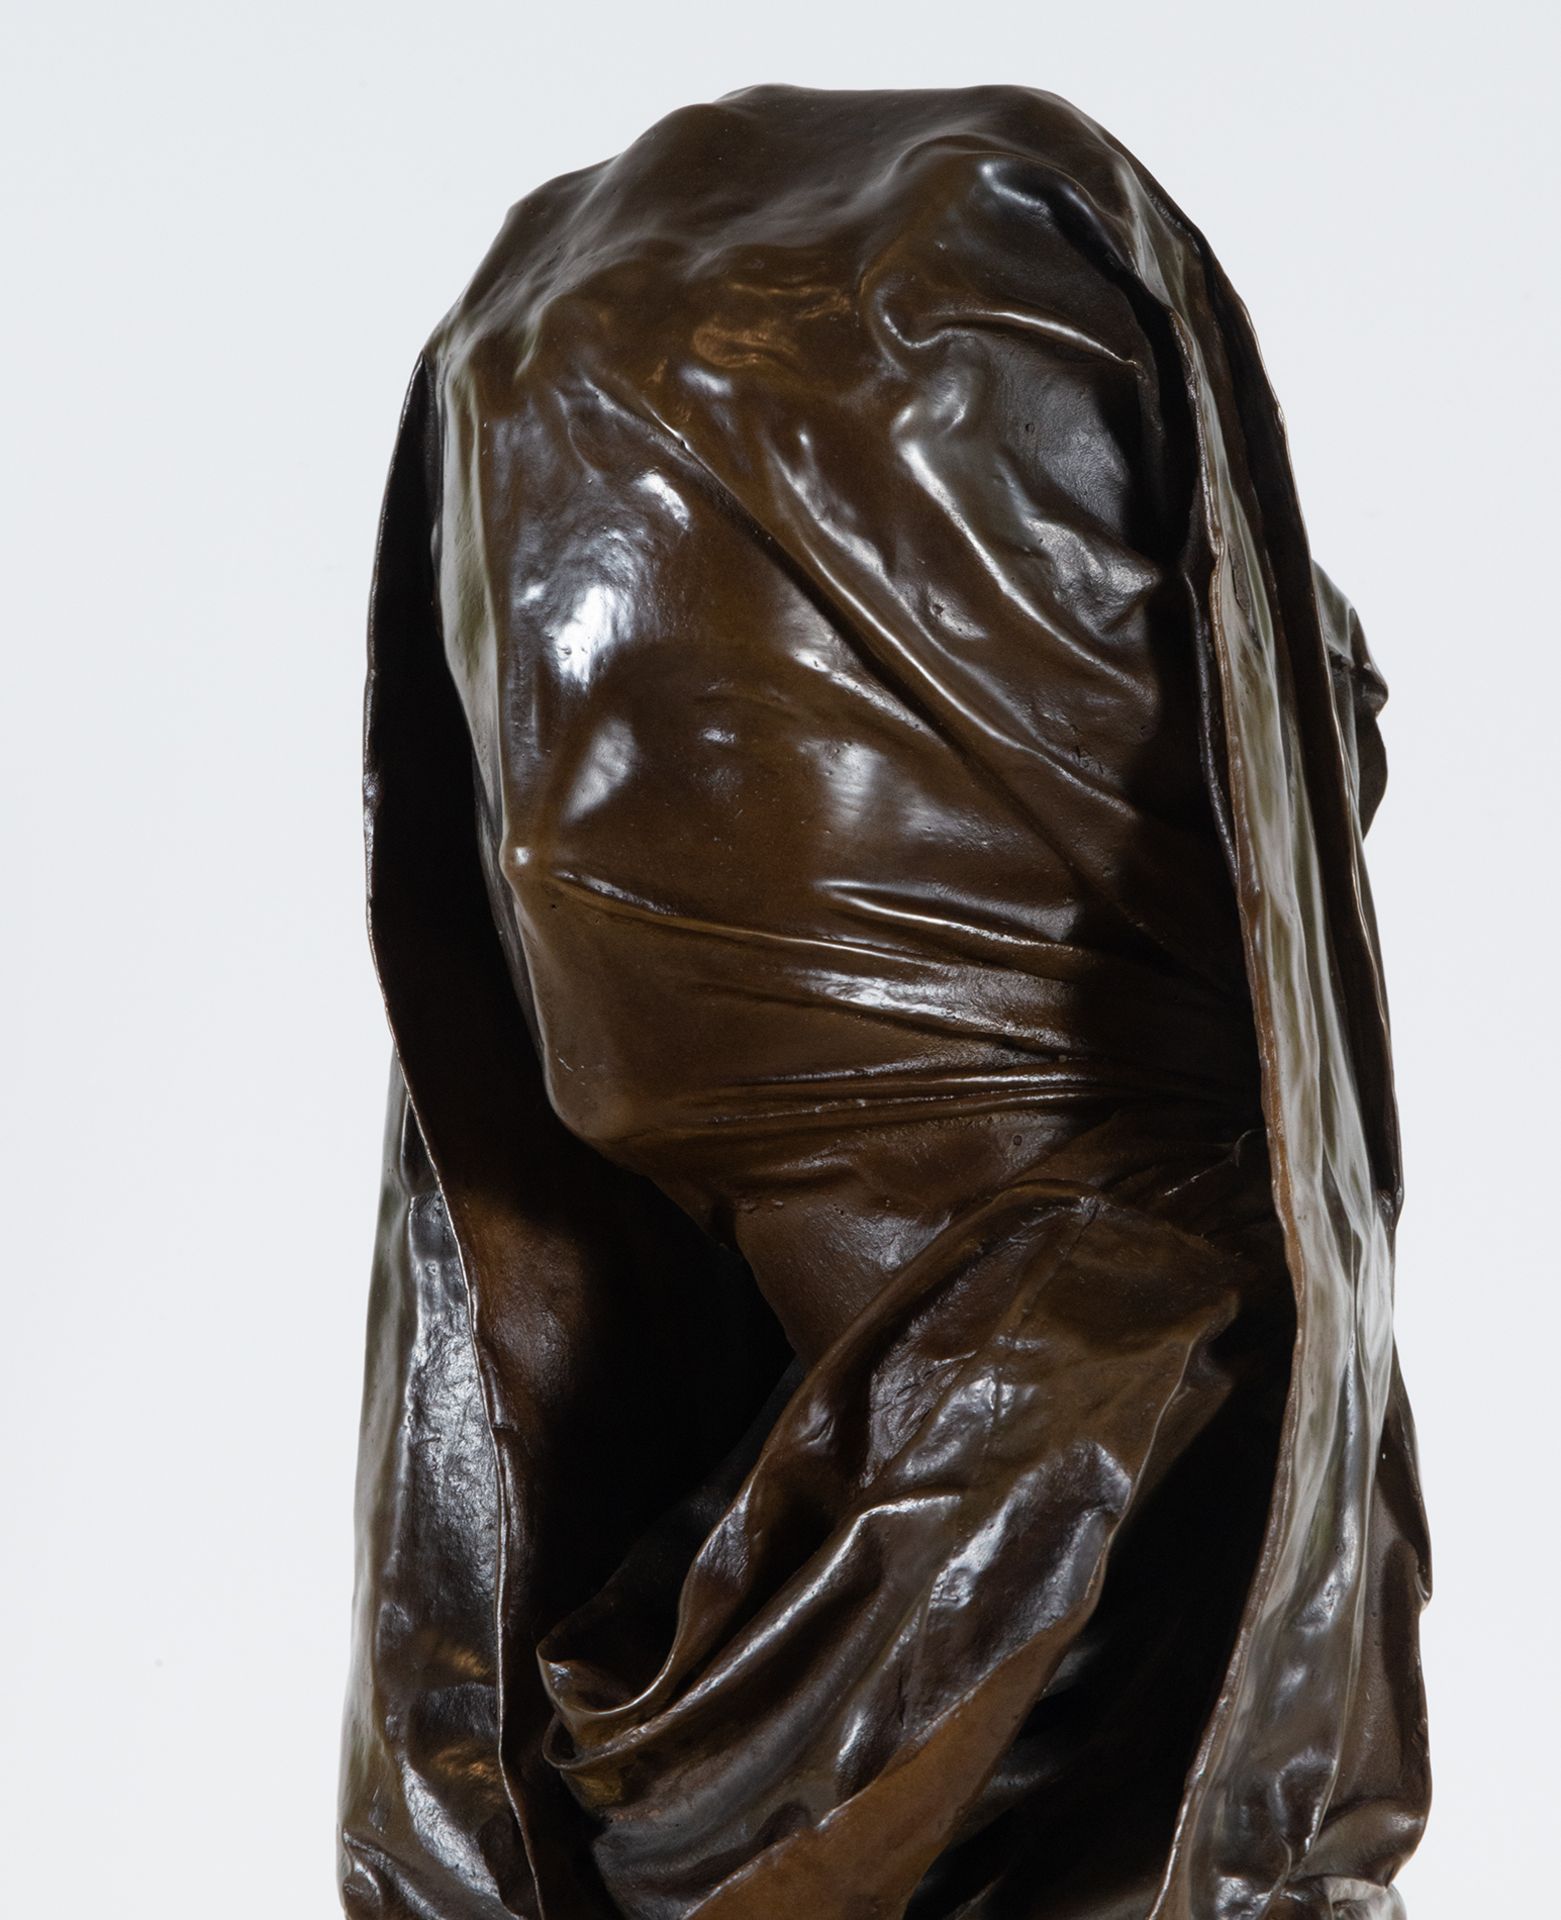 Bust of Lady with Veil, bronze sculpture, 19th century European school - Image 5 of 8